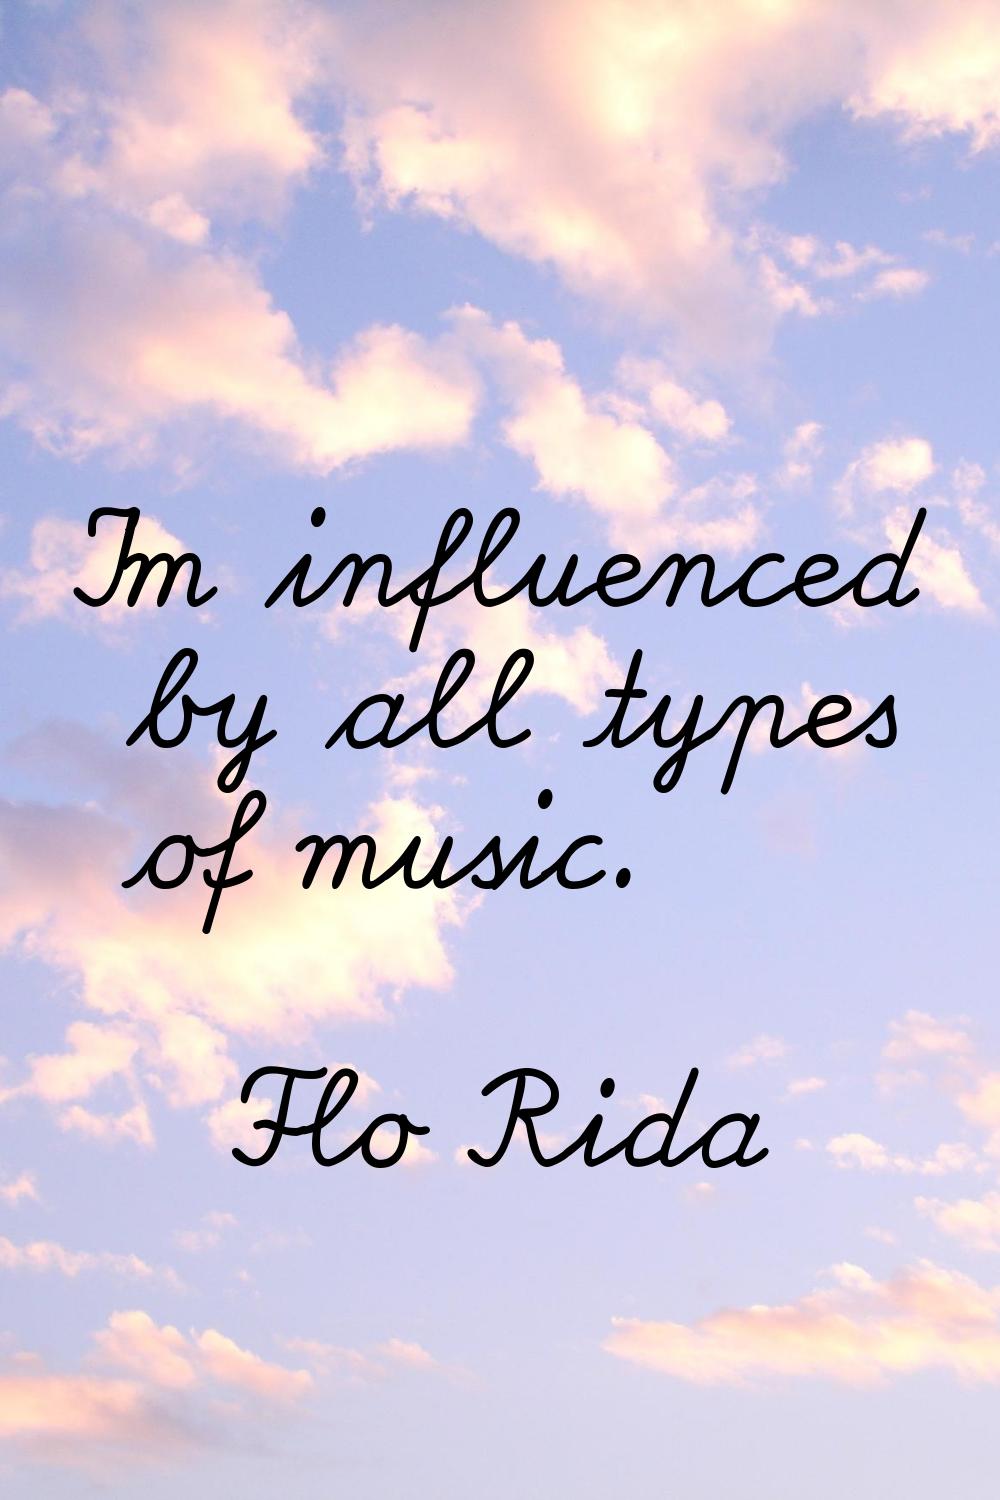 I'm influenced by all types of music.